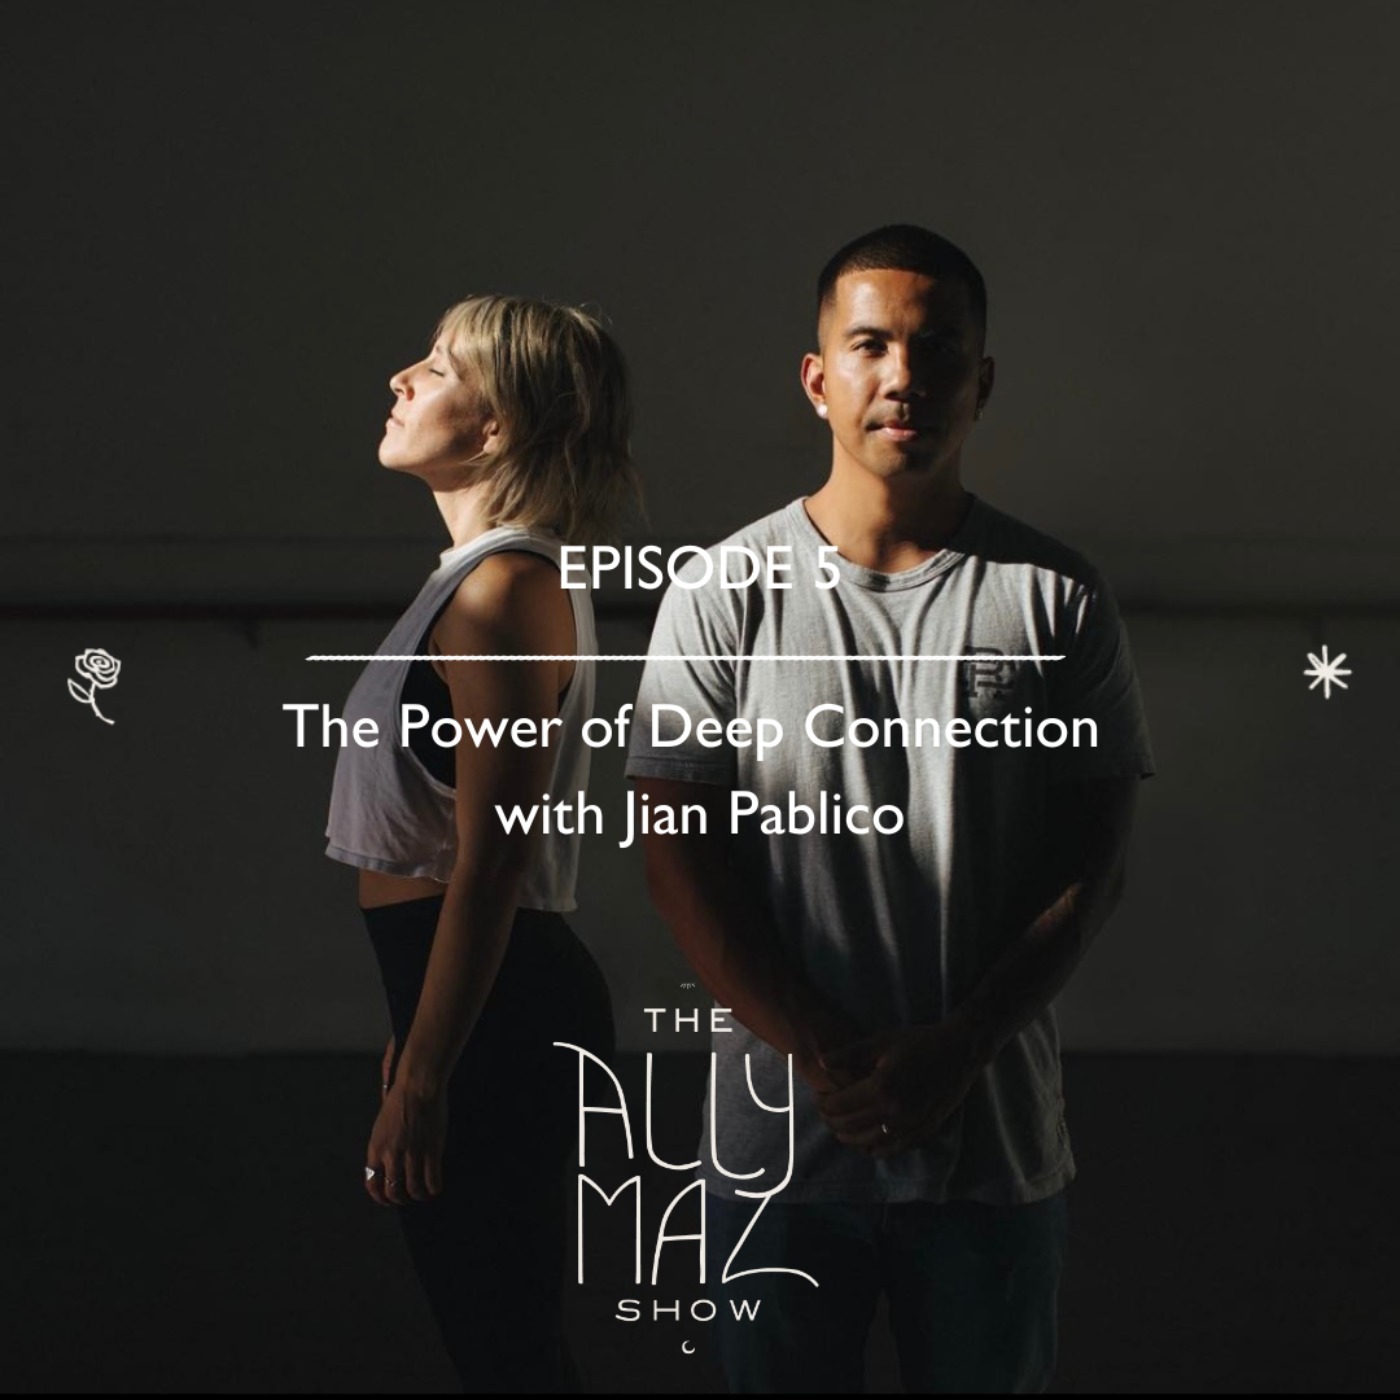 The Power of Deep Connection with Jian Pablico